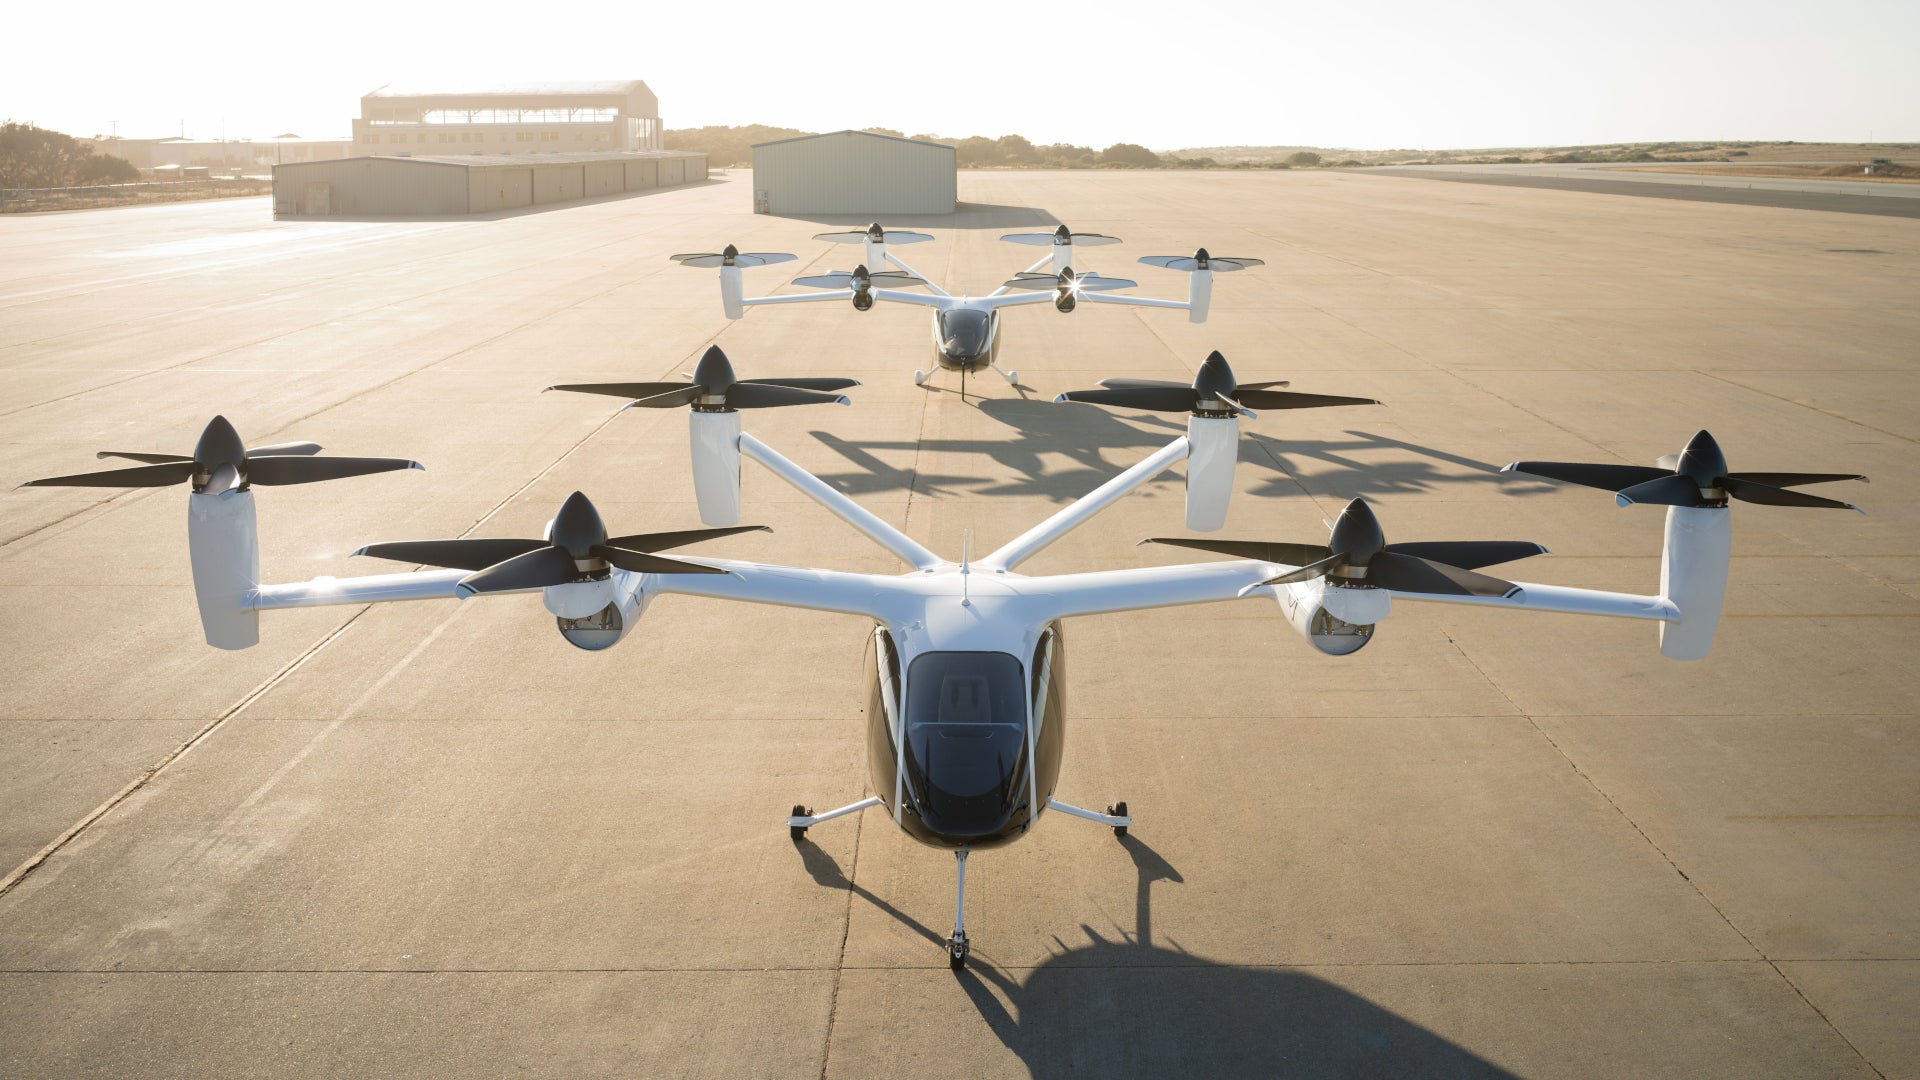 Joby Aviation Acquires Ohio Facility To Support Initial Manufacturing of Electric Air Taxi